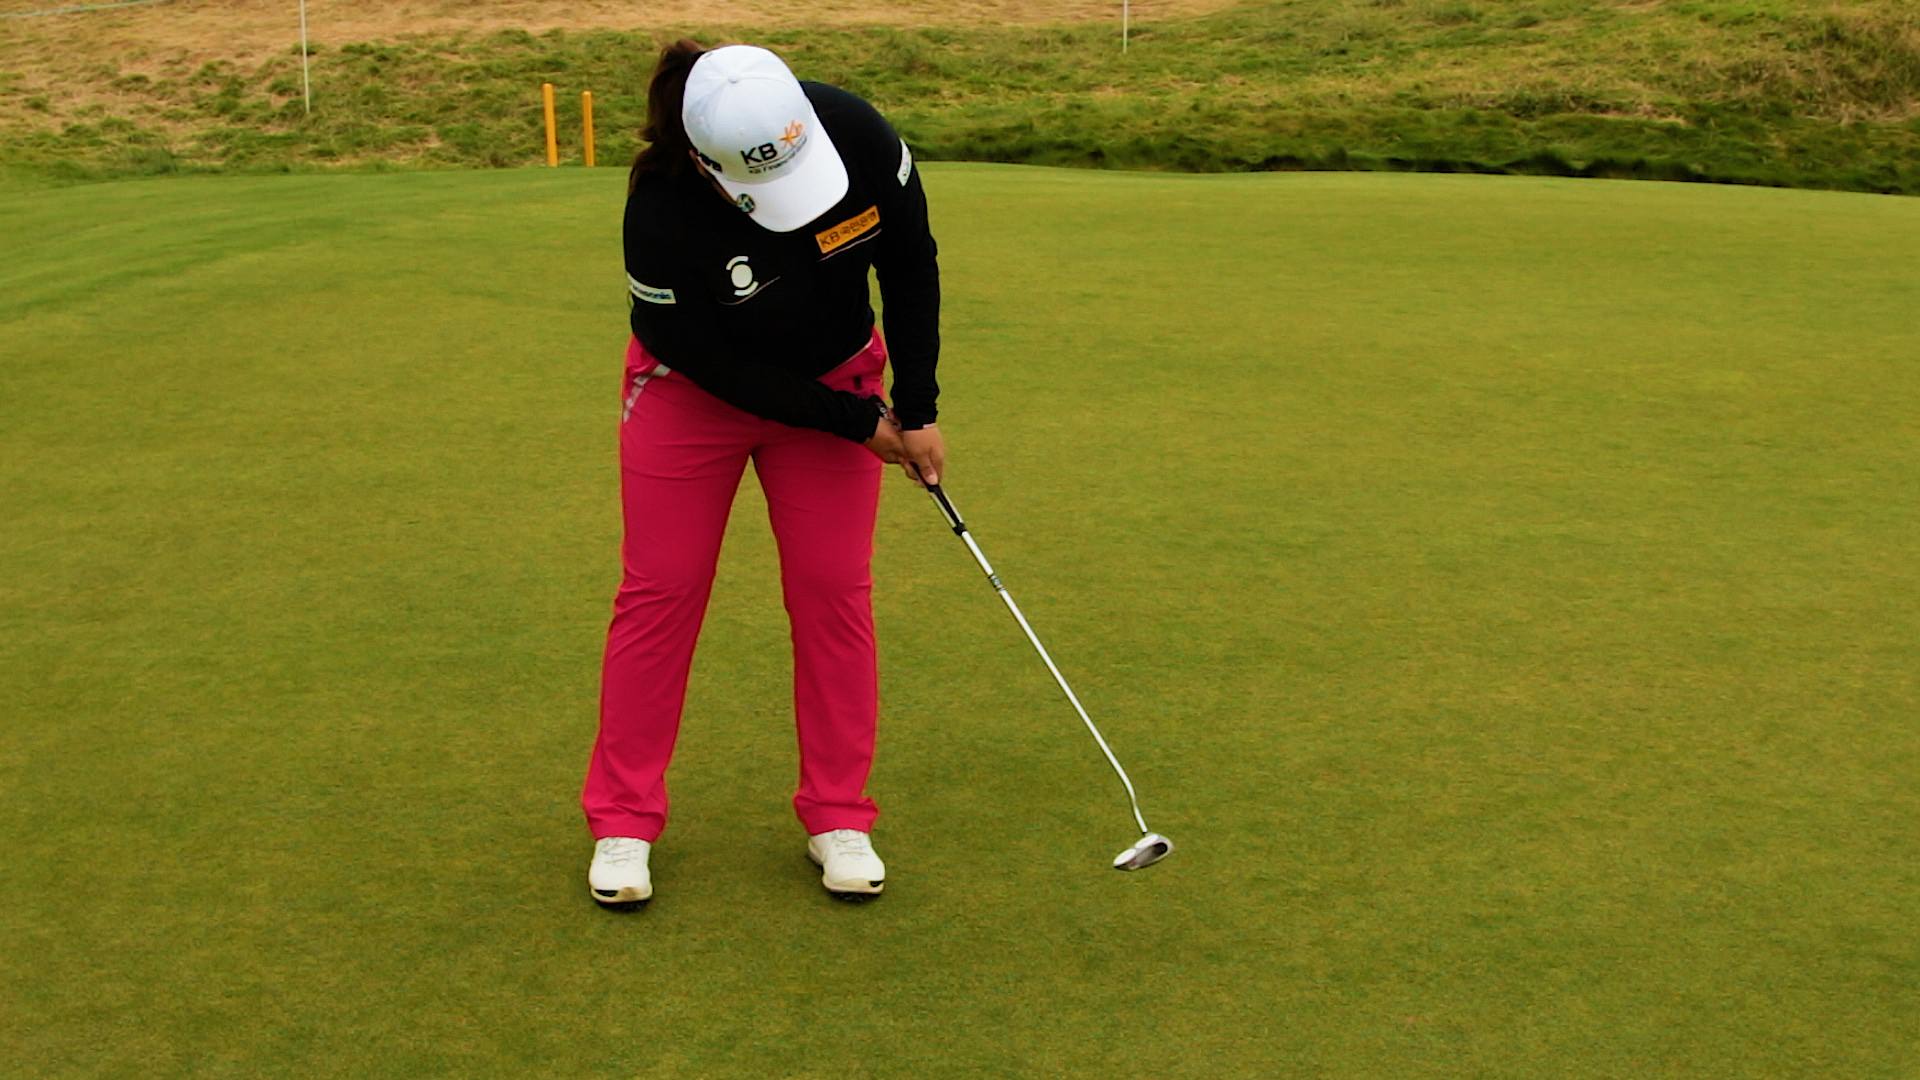 Inbee Park putting tips: The stroke